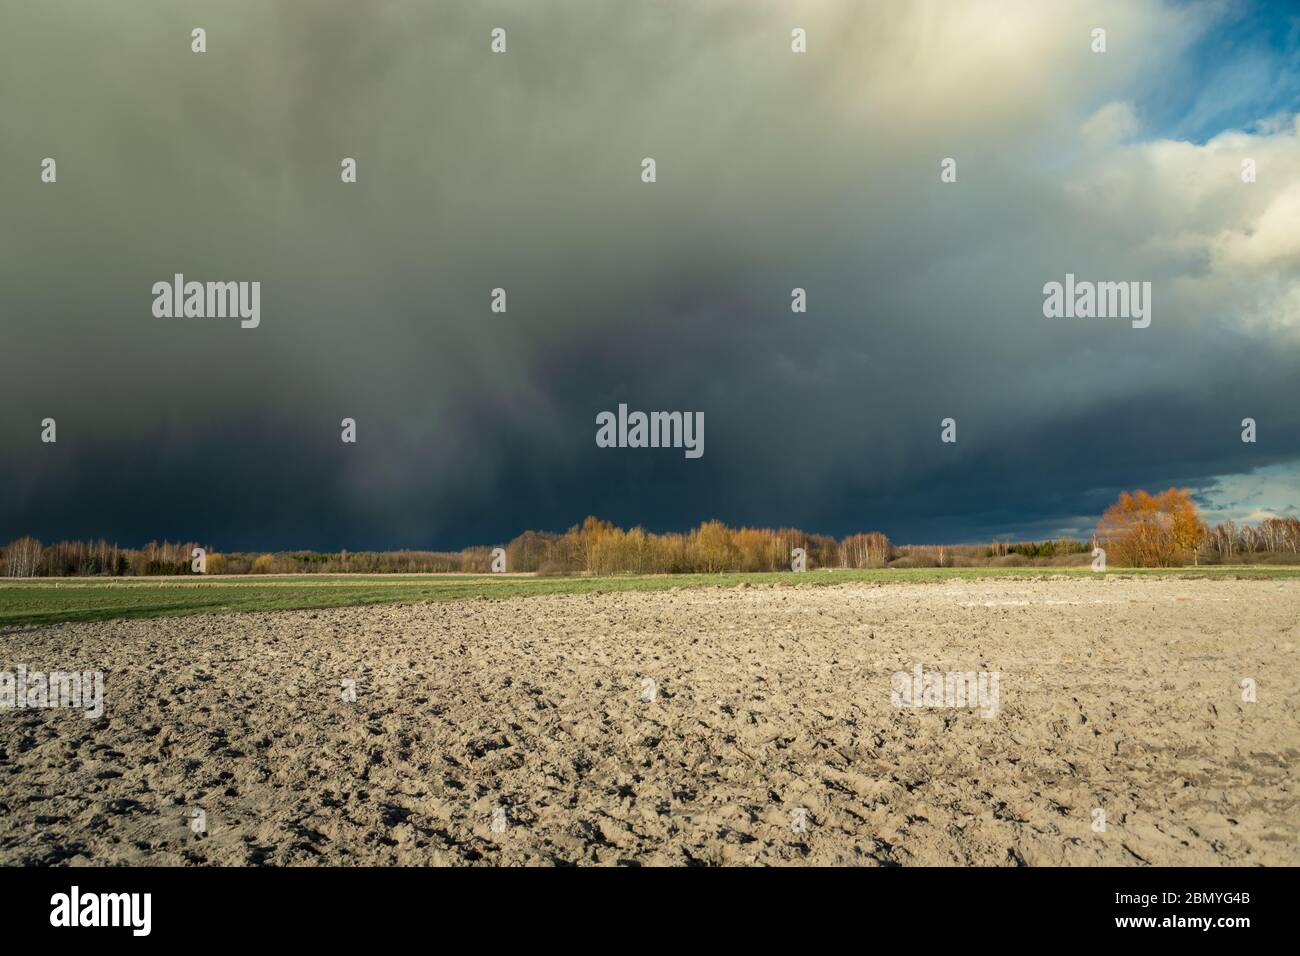 Huge dark hail cloud over the plowed field, view on a spring sunny day Stock Photo